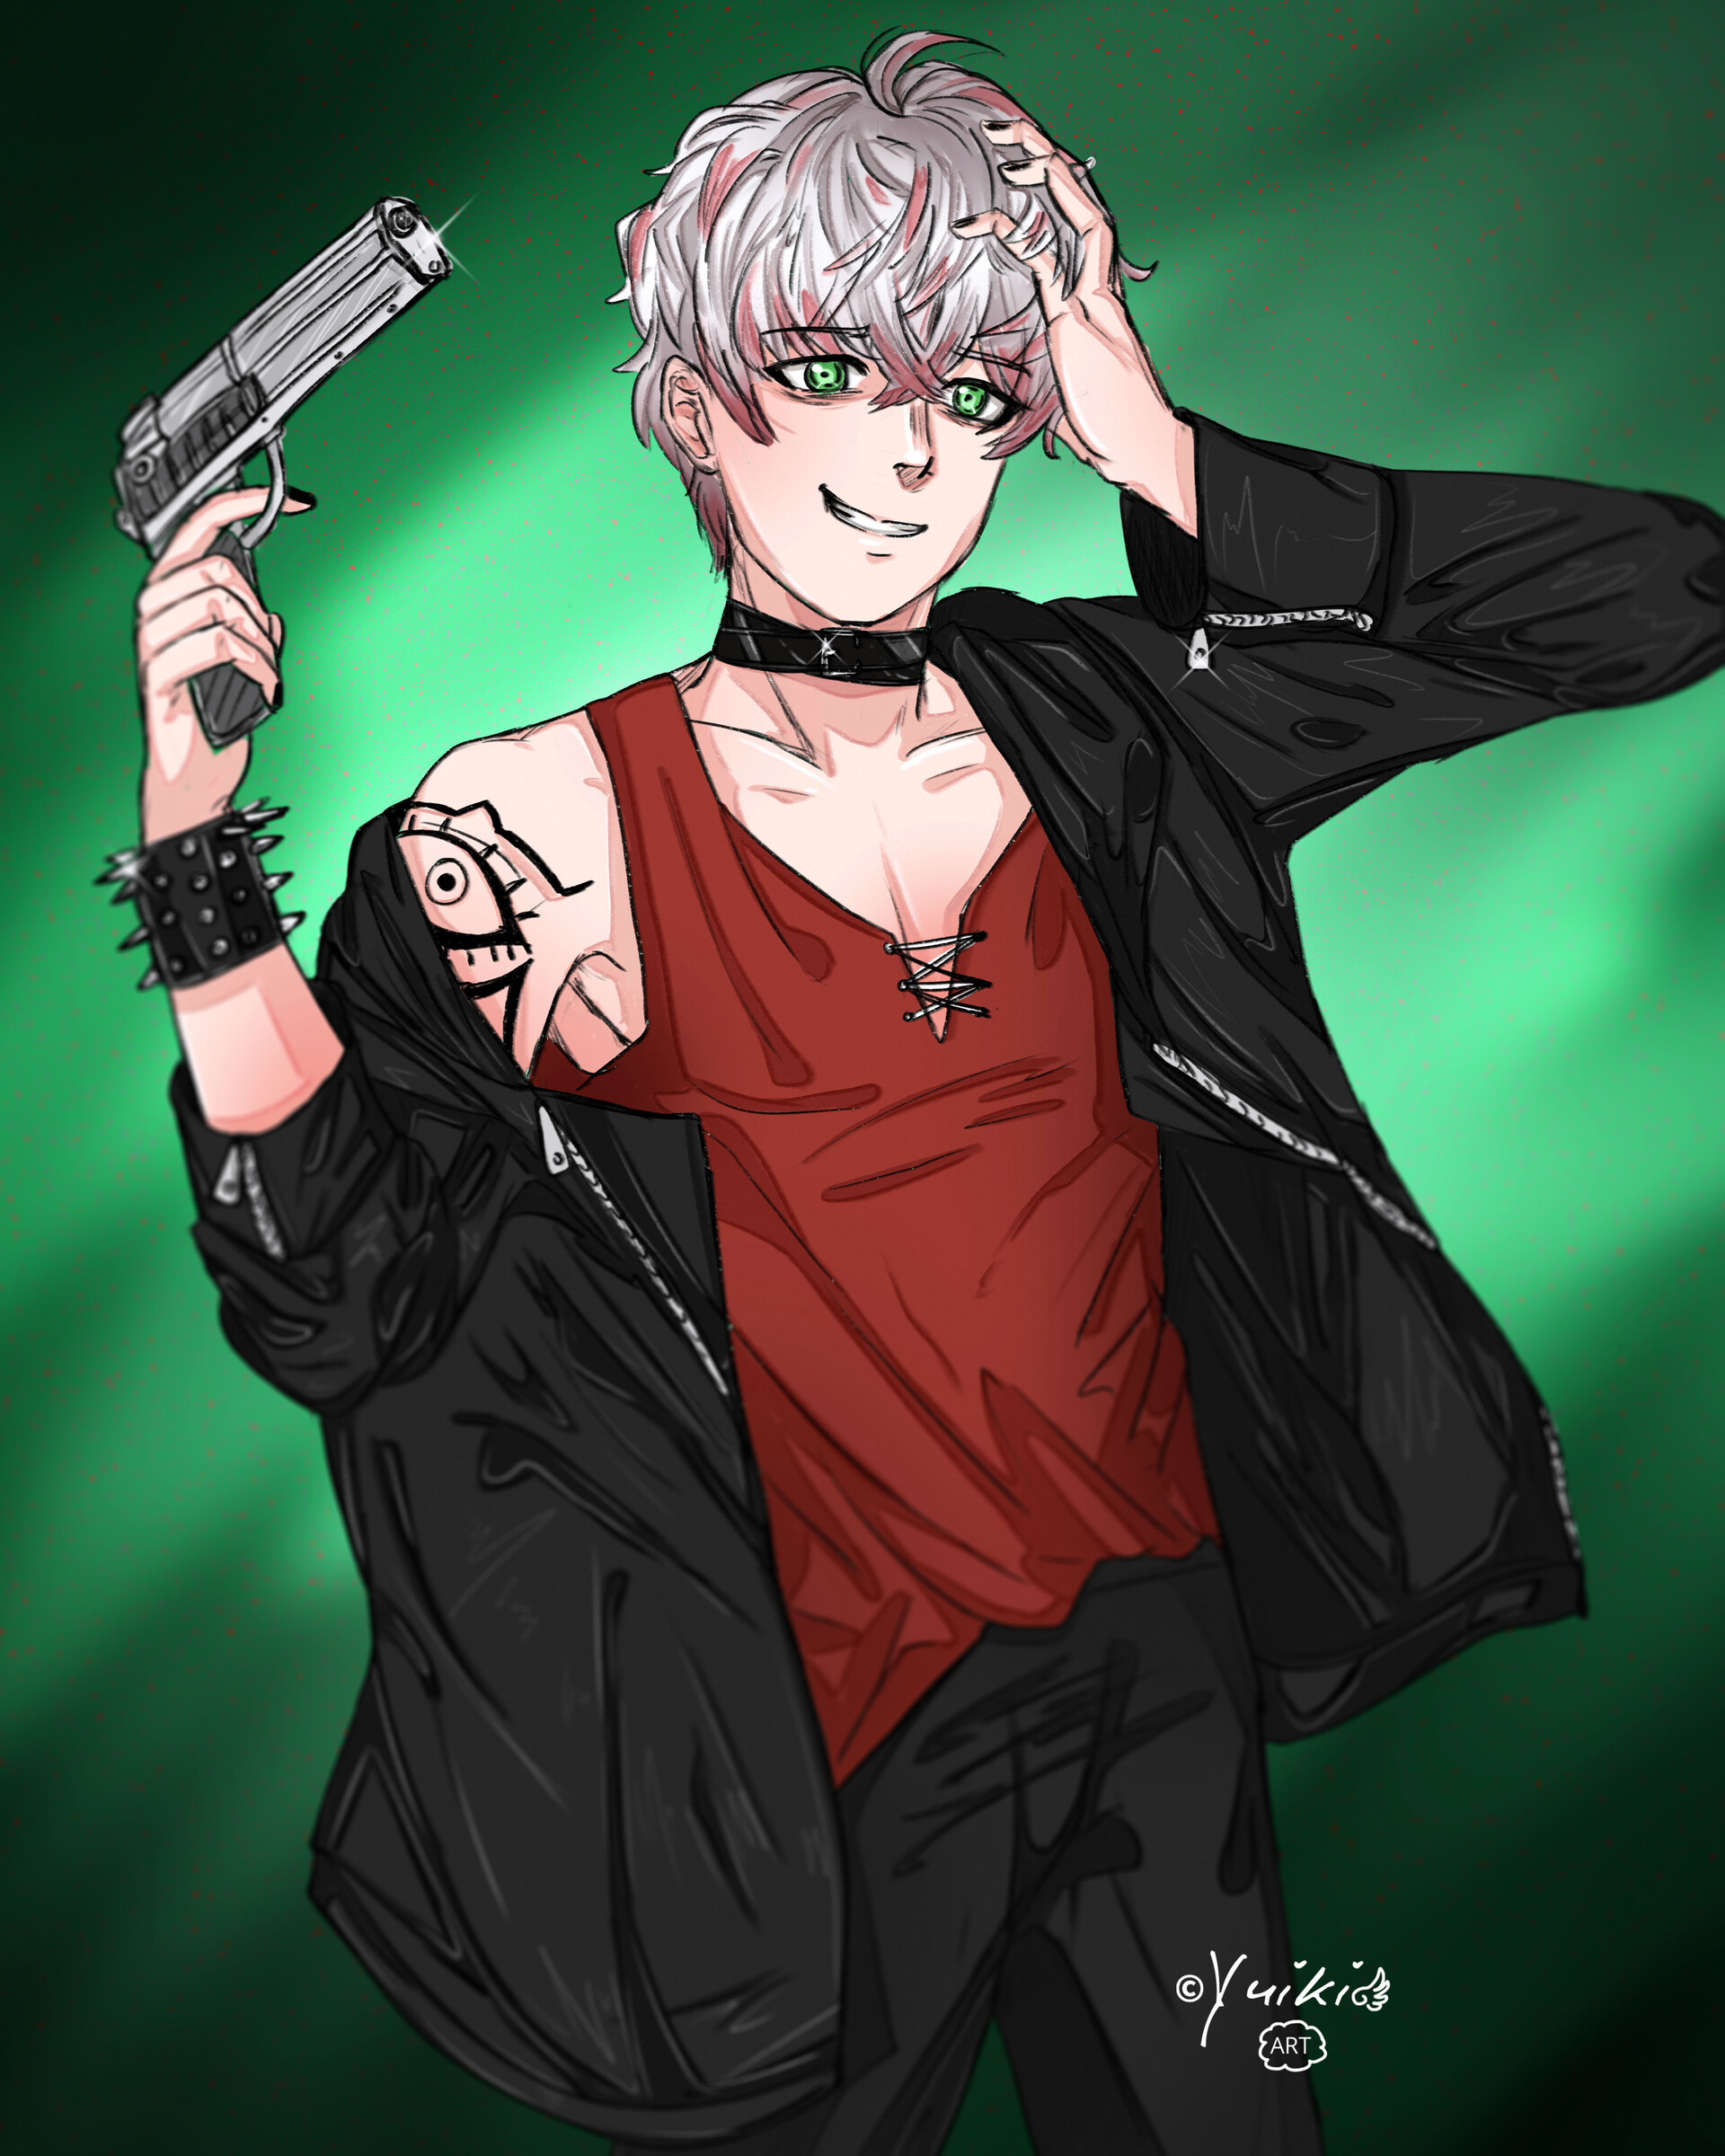 Saeran Unknown Mystic Messenger Otome Anime Painting - Etsy